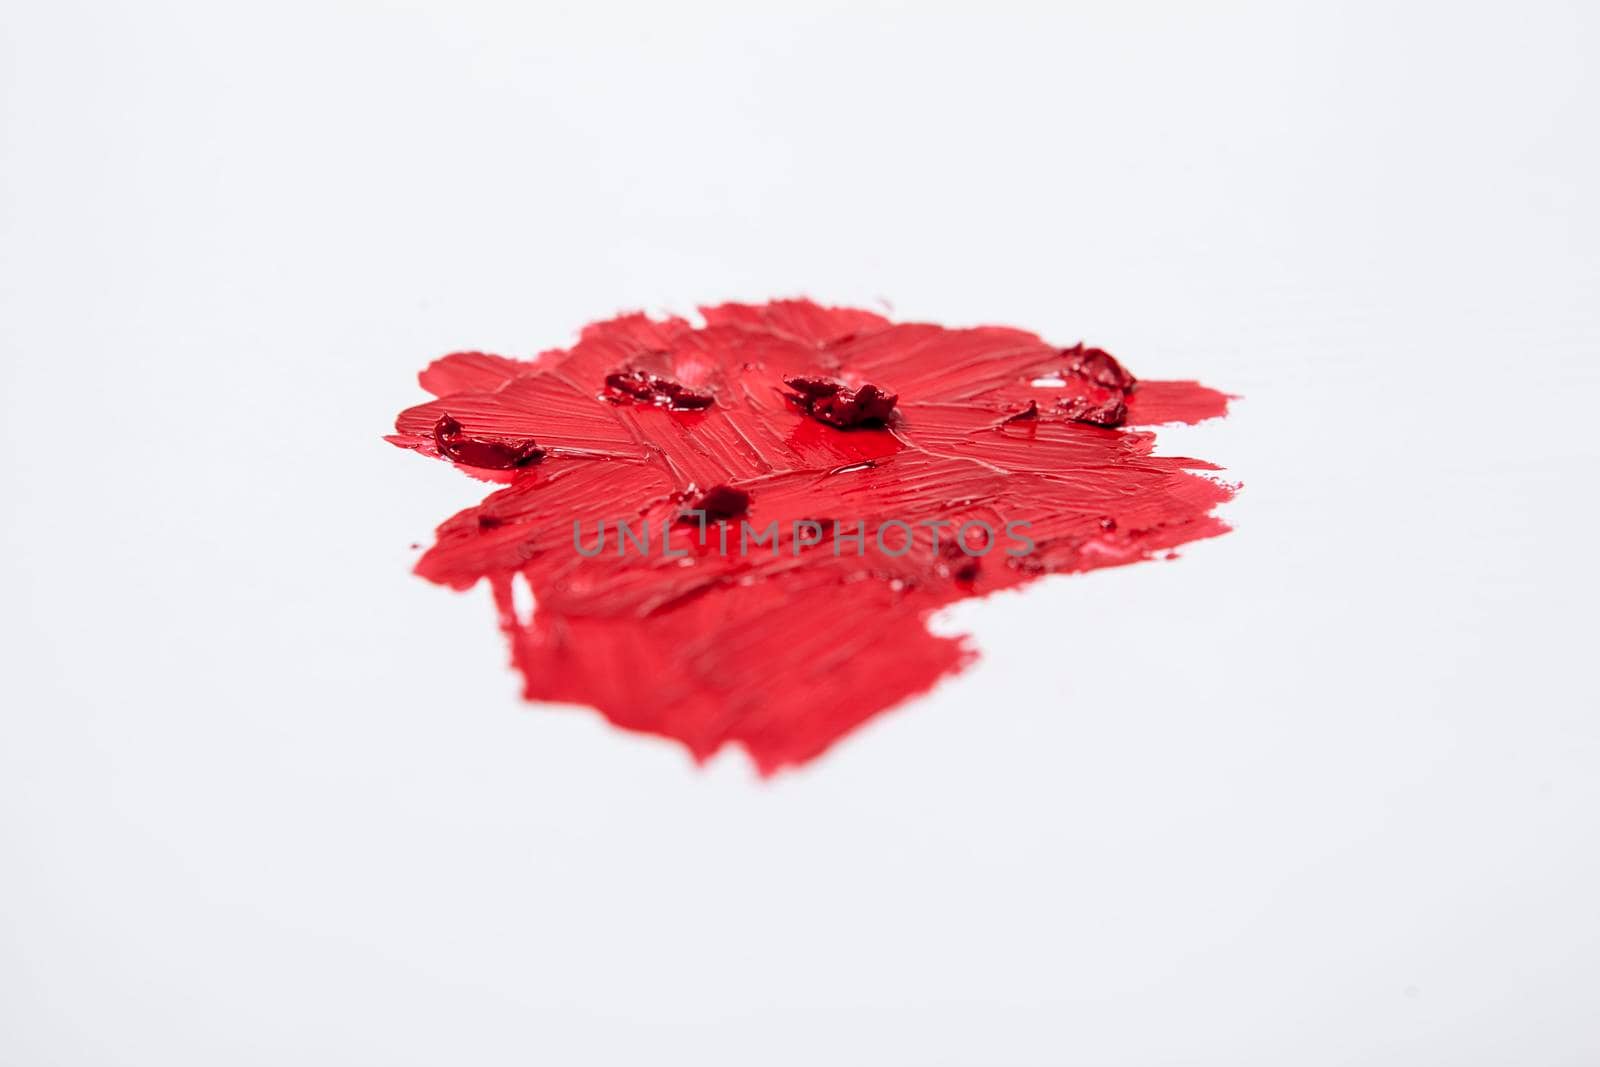 Red lipstick smudged on white background by MAD_Production